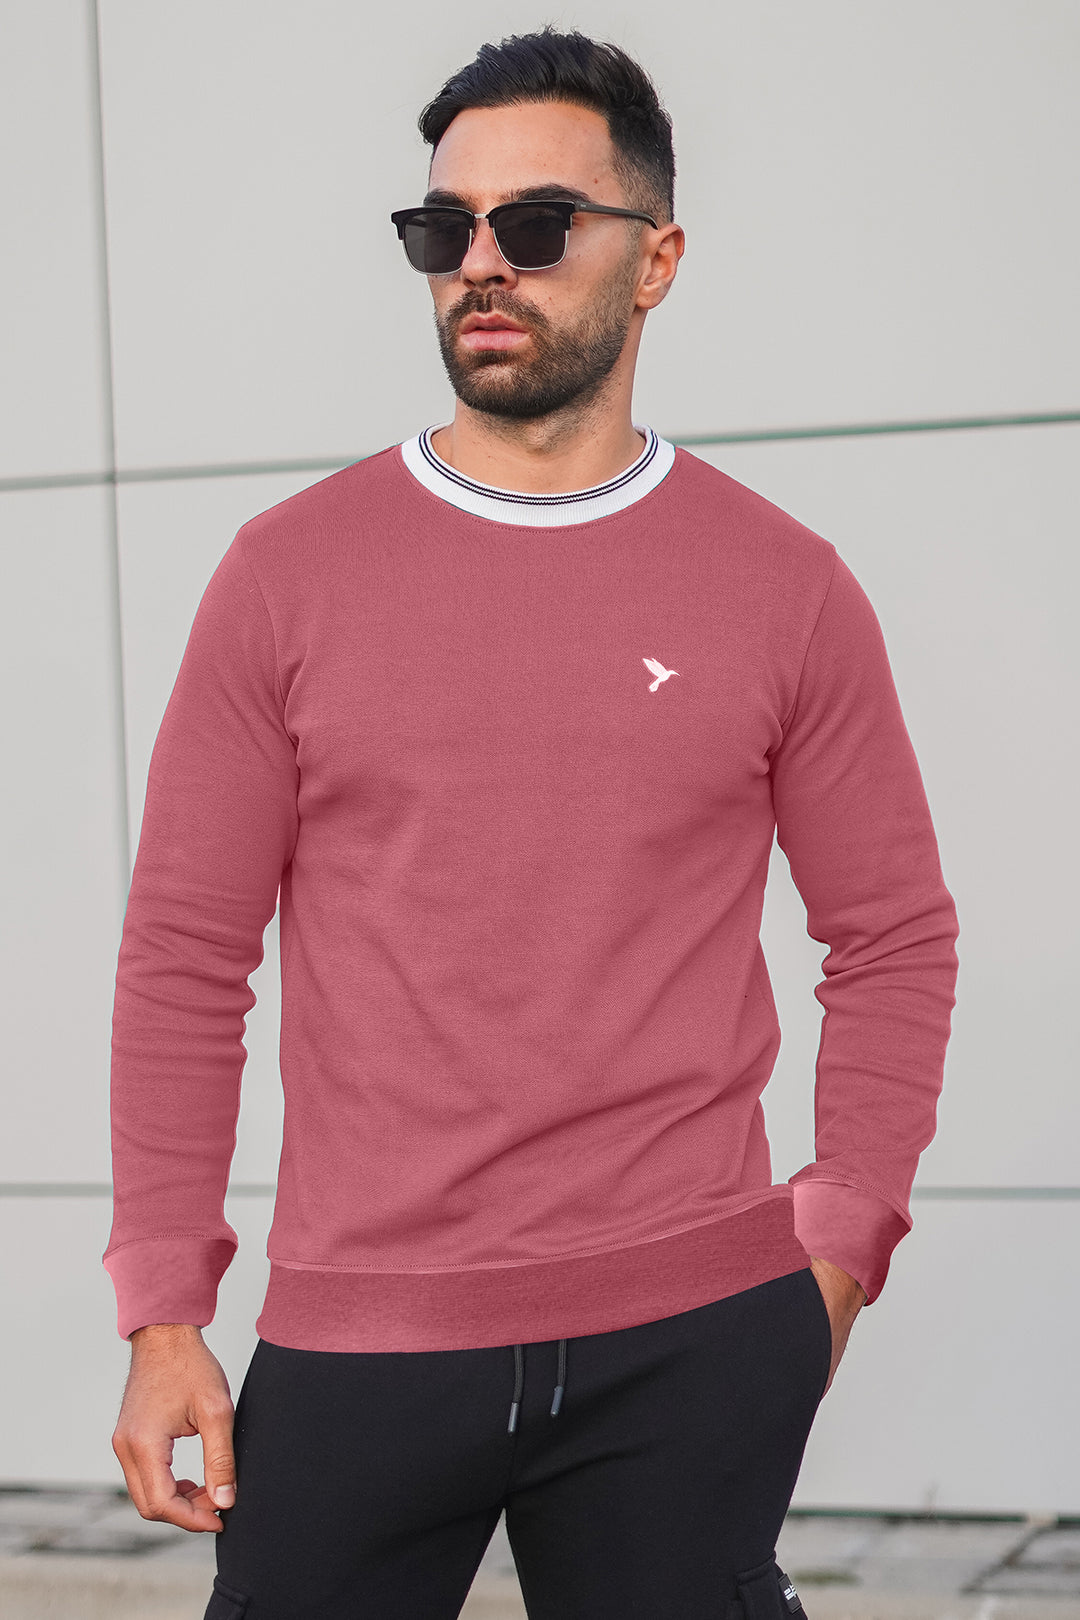 Dusty Rose Embroidered Sweatshirt - W23 - MSW081R